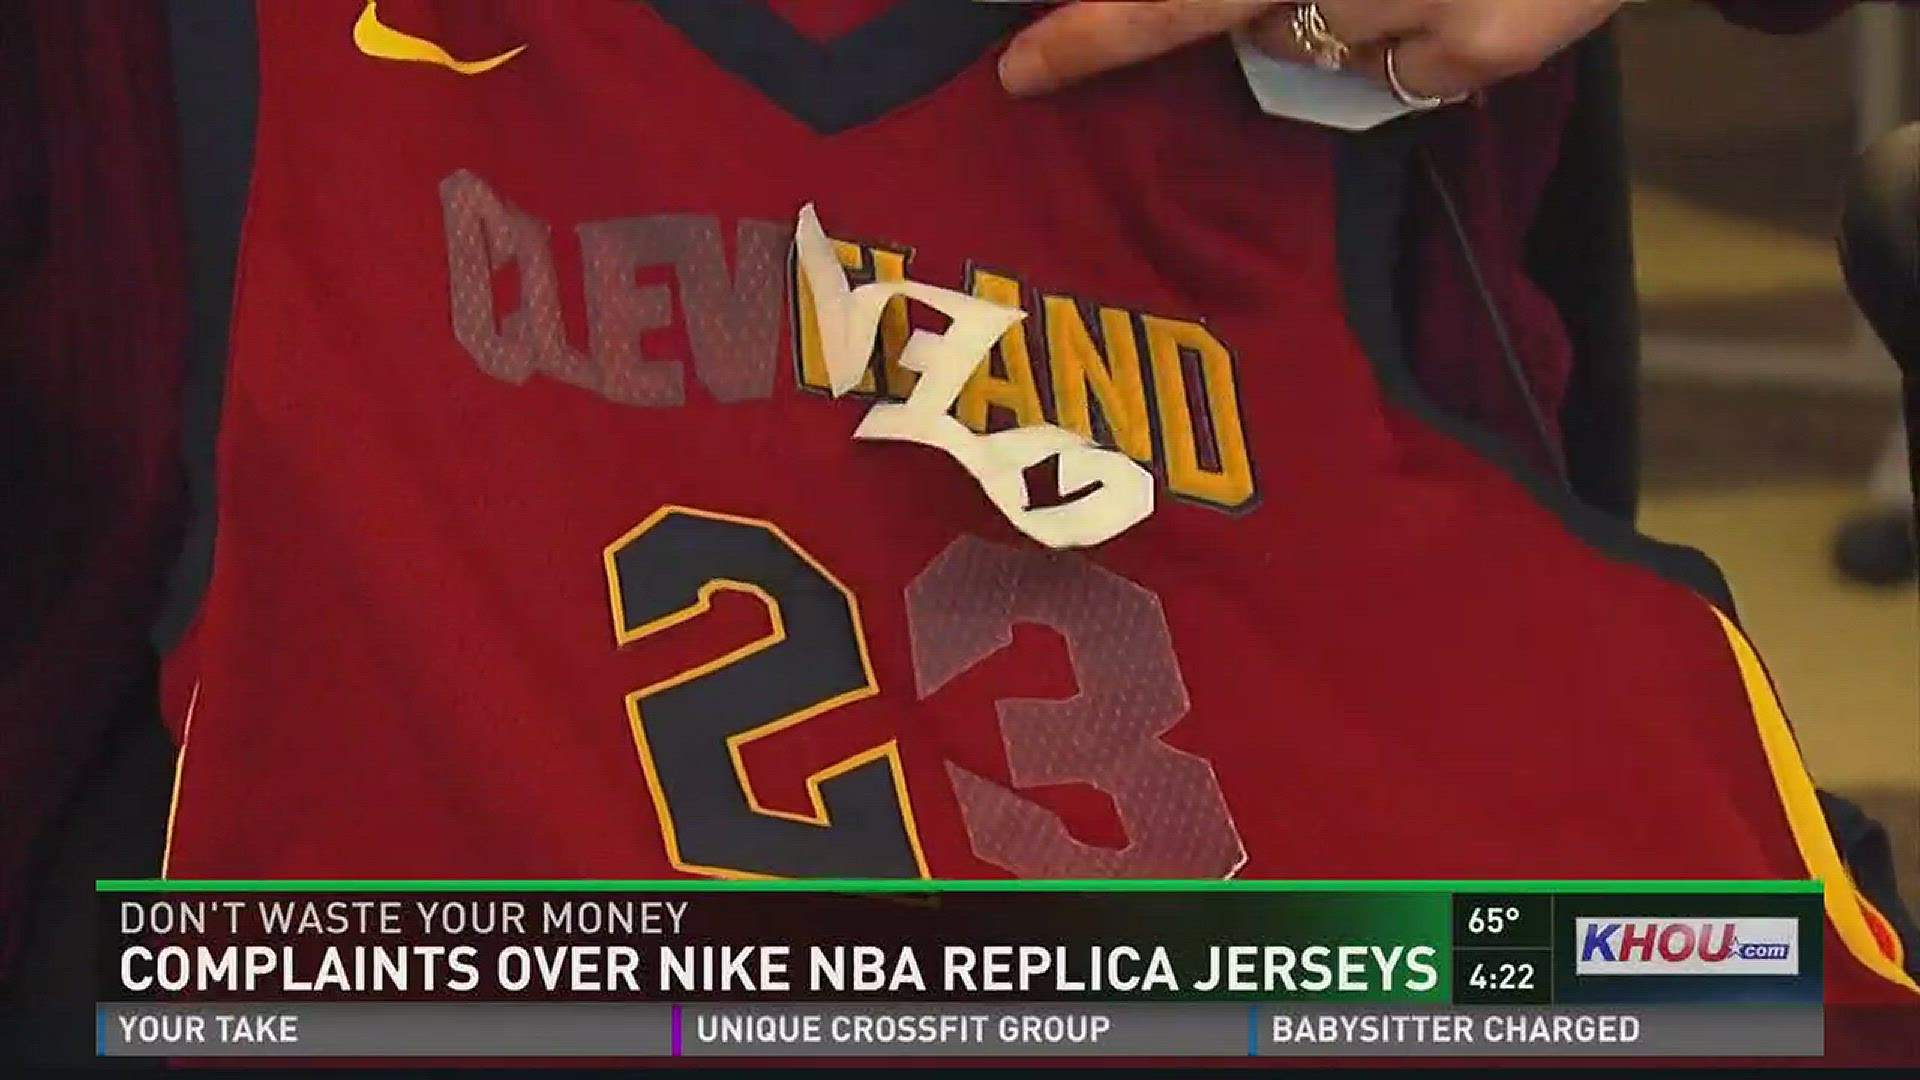 Some customers are complaining the Nike Swingman replica jerseys are poor quality